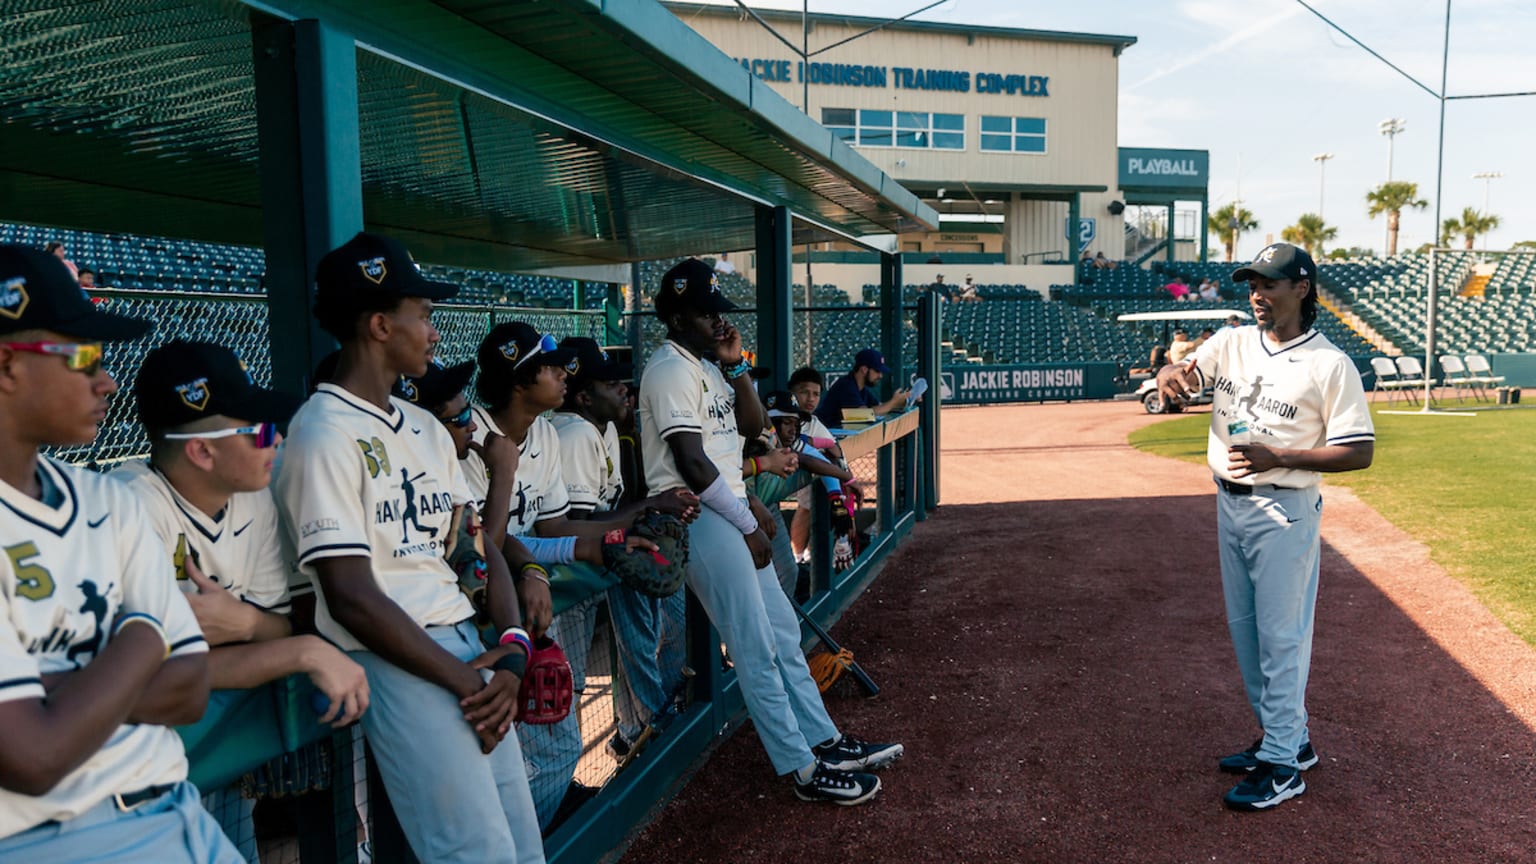 Players gather in a dugout during the Hank Aaron Invitational